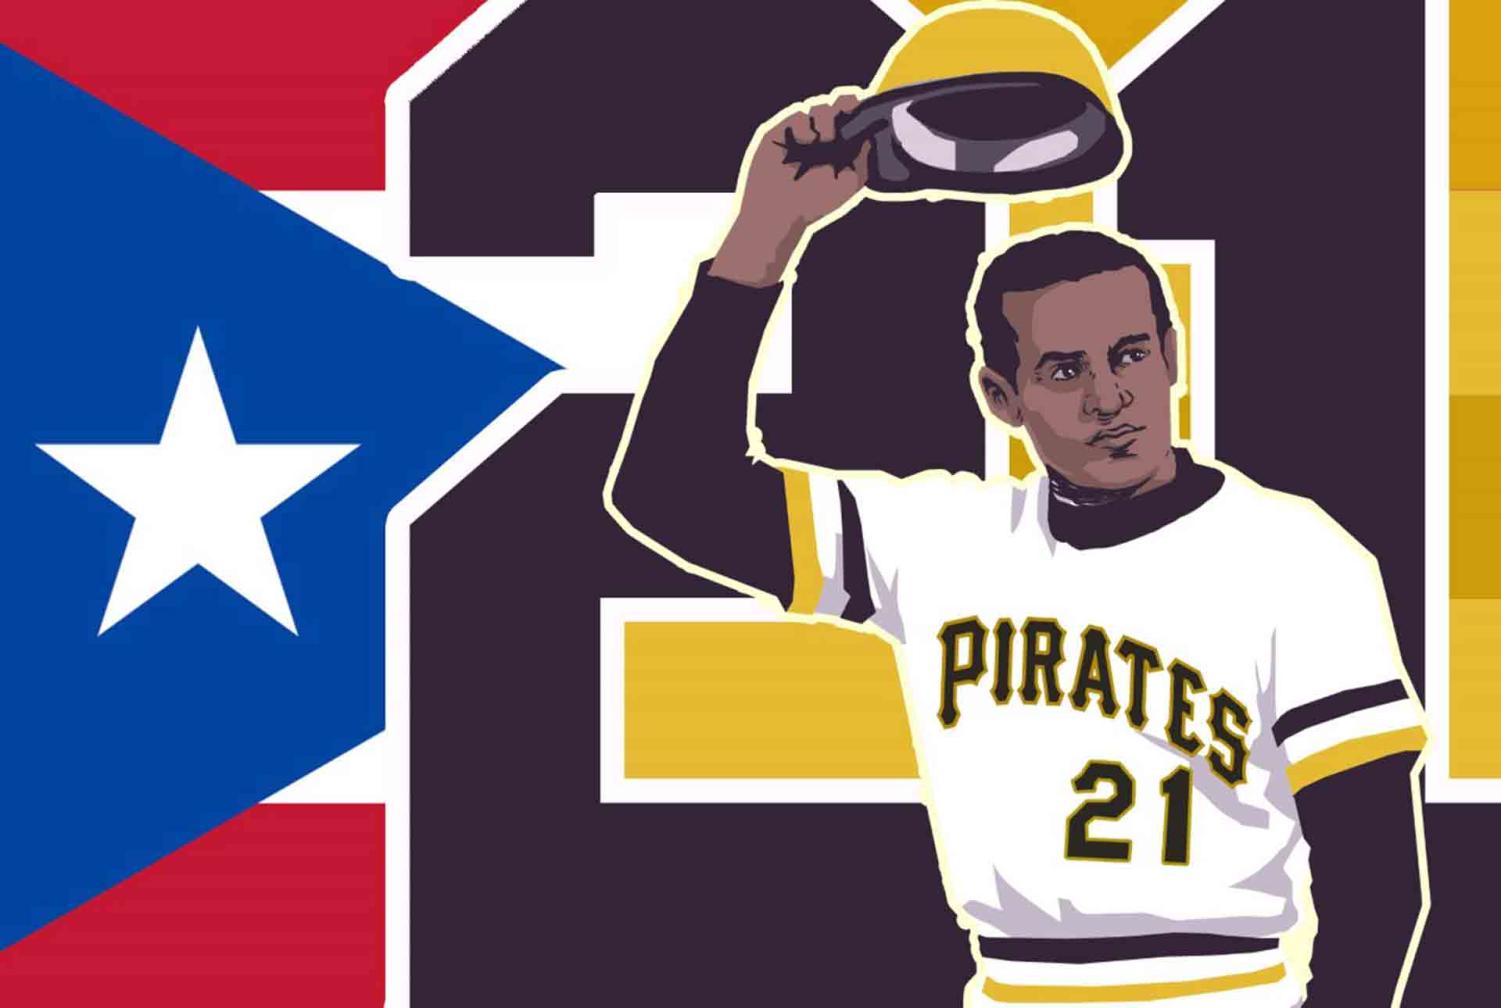 MLB Officially Announces Sept. 15 As Roberto Clemente Day – The Impact